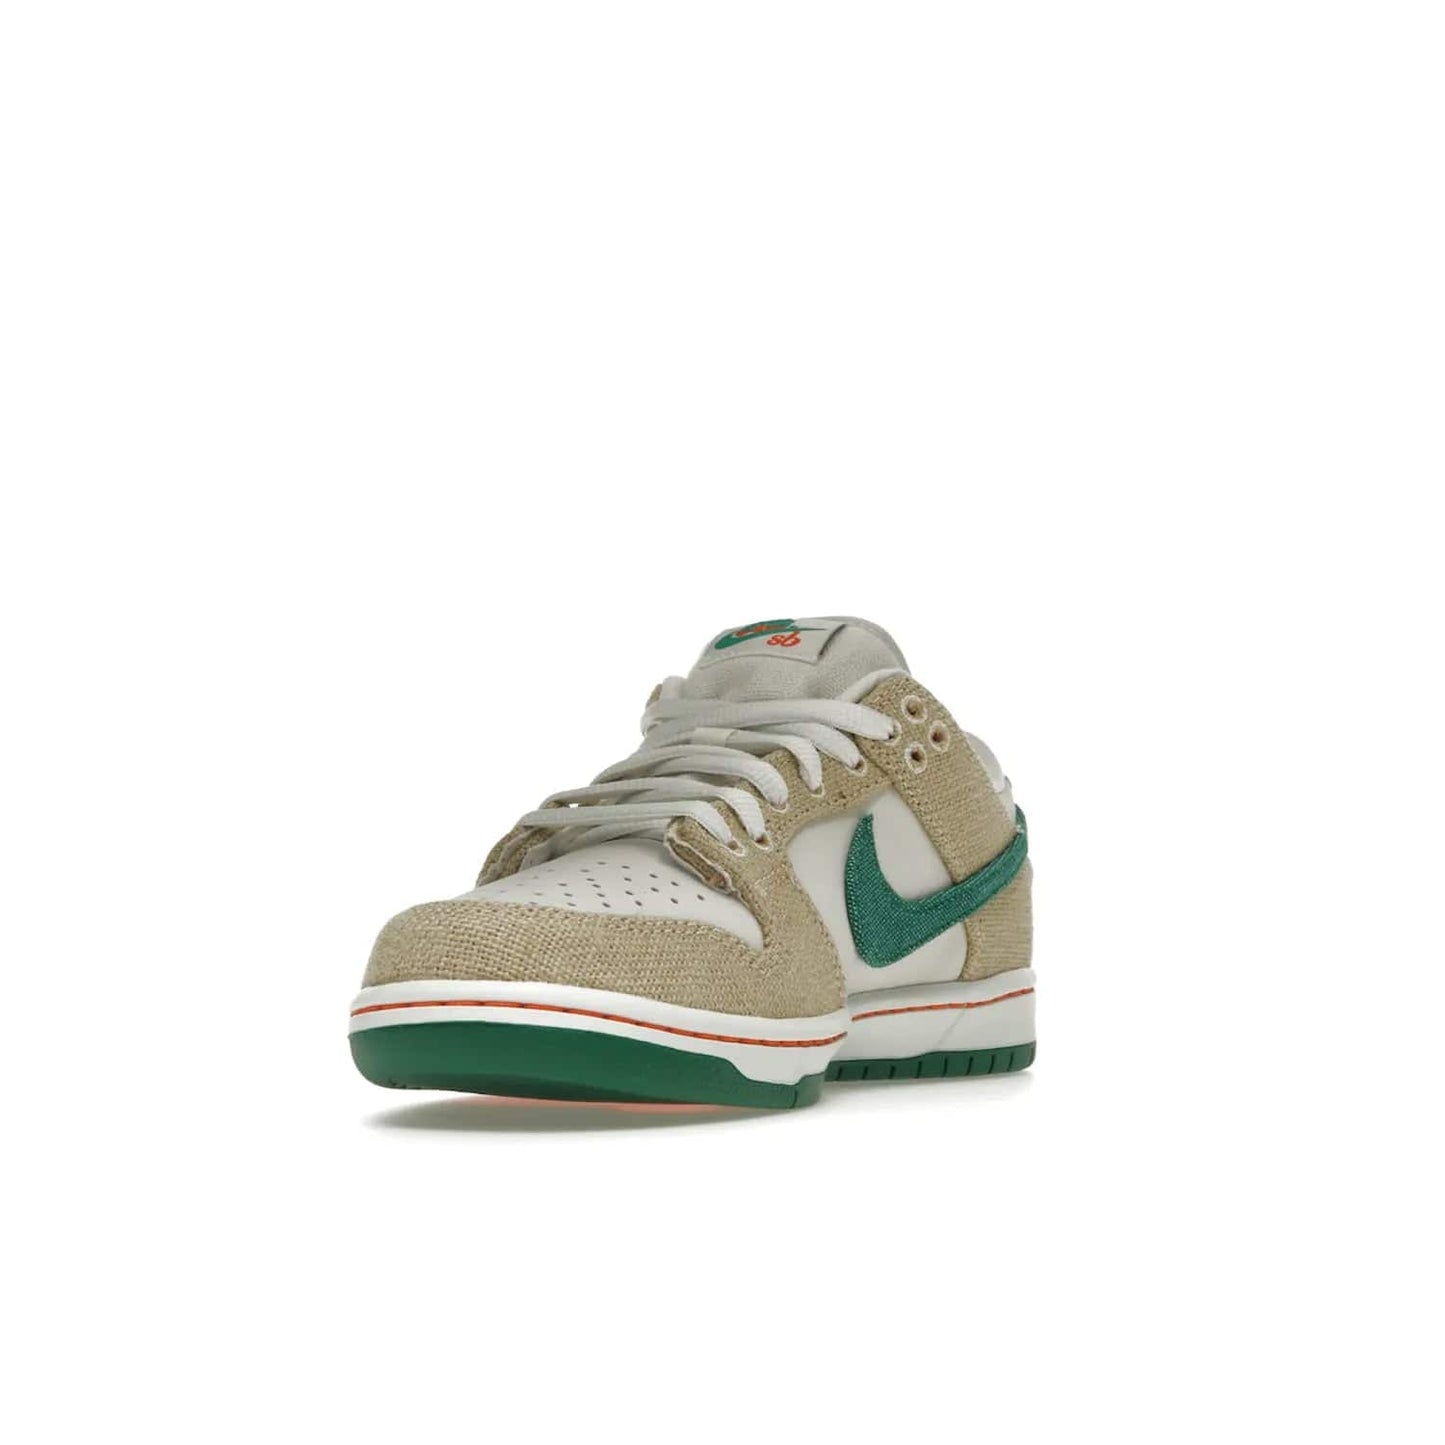 Nike SB Dunk Low Jarritos - Image 13 - Only at www.BallersClubKickz.com - Shop limited edition Nike SB Dunk Low Jarritos! Crafted with white leather and tear-away canvas materials with green accents. Includes orange, green, and white laces to customize your look. Available now.